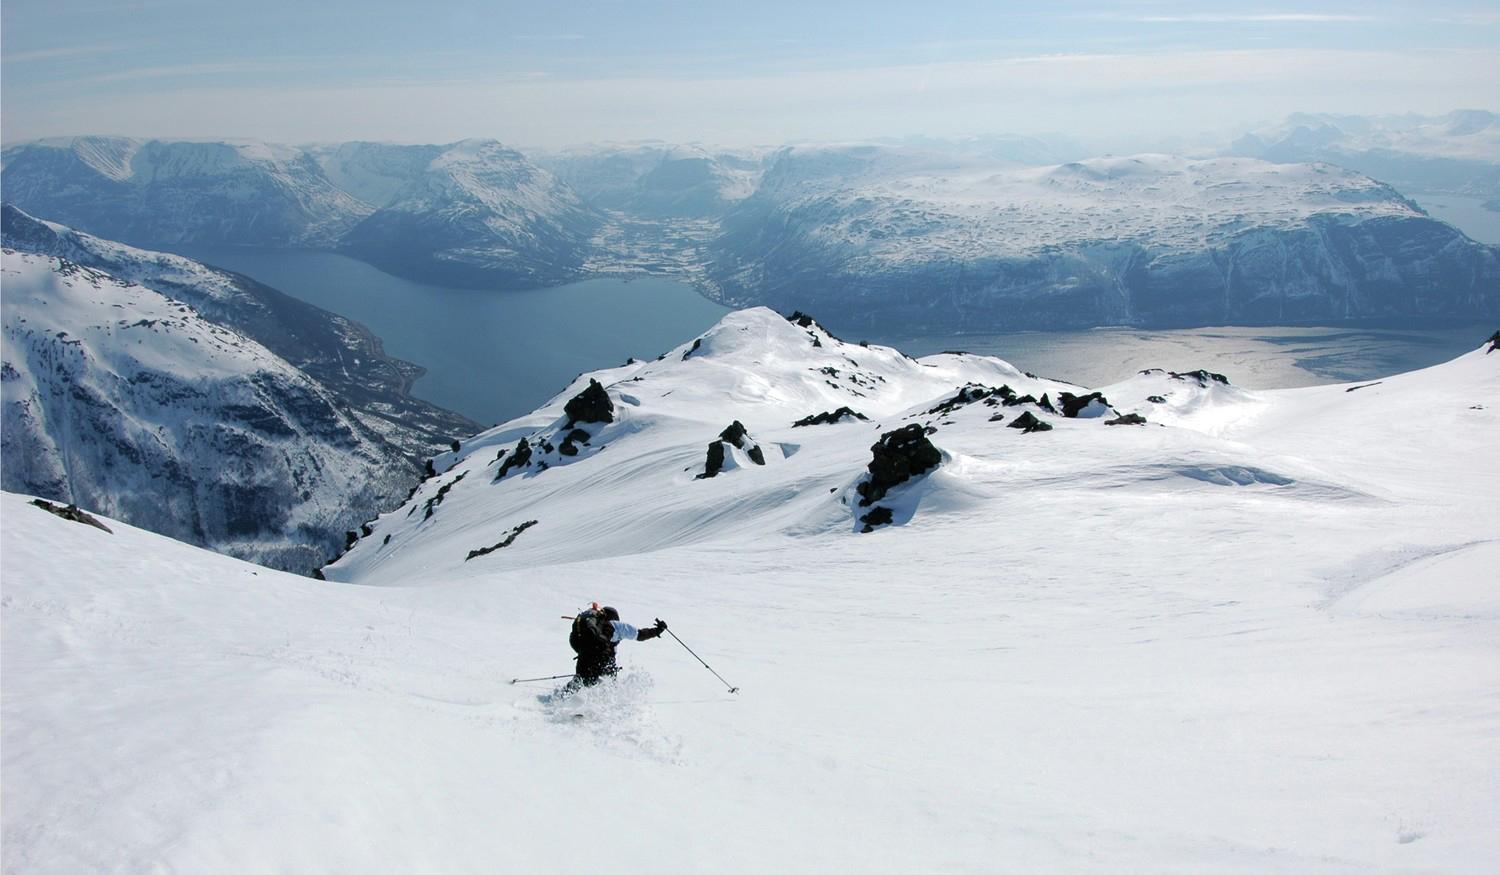 Sail & Ski is just one of the adventurous activities you can try in Lyngenfjord